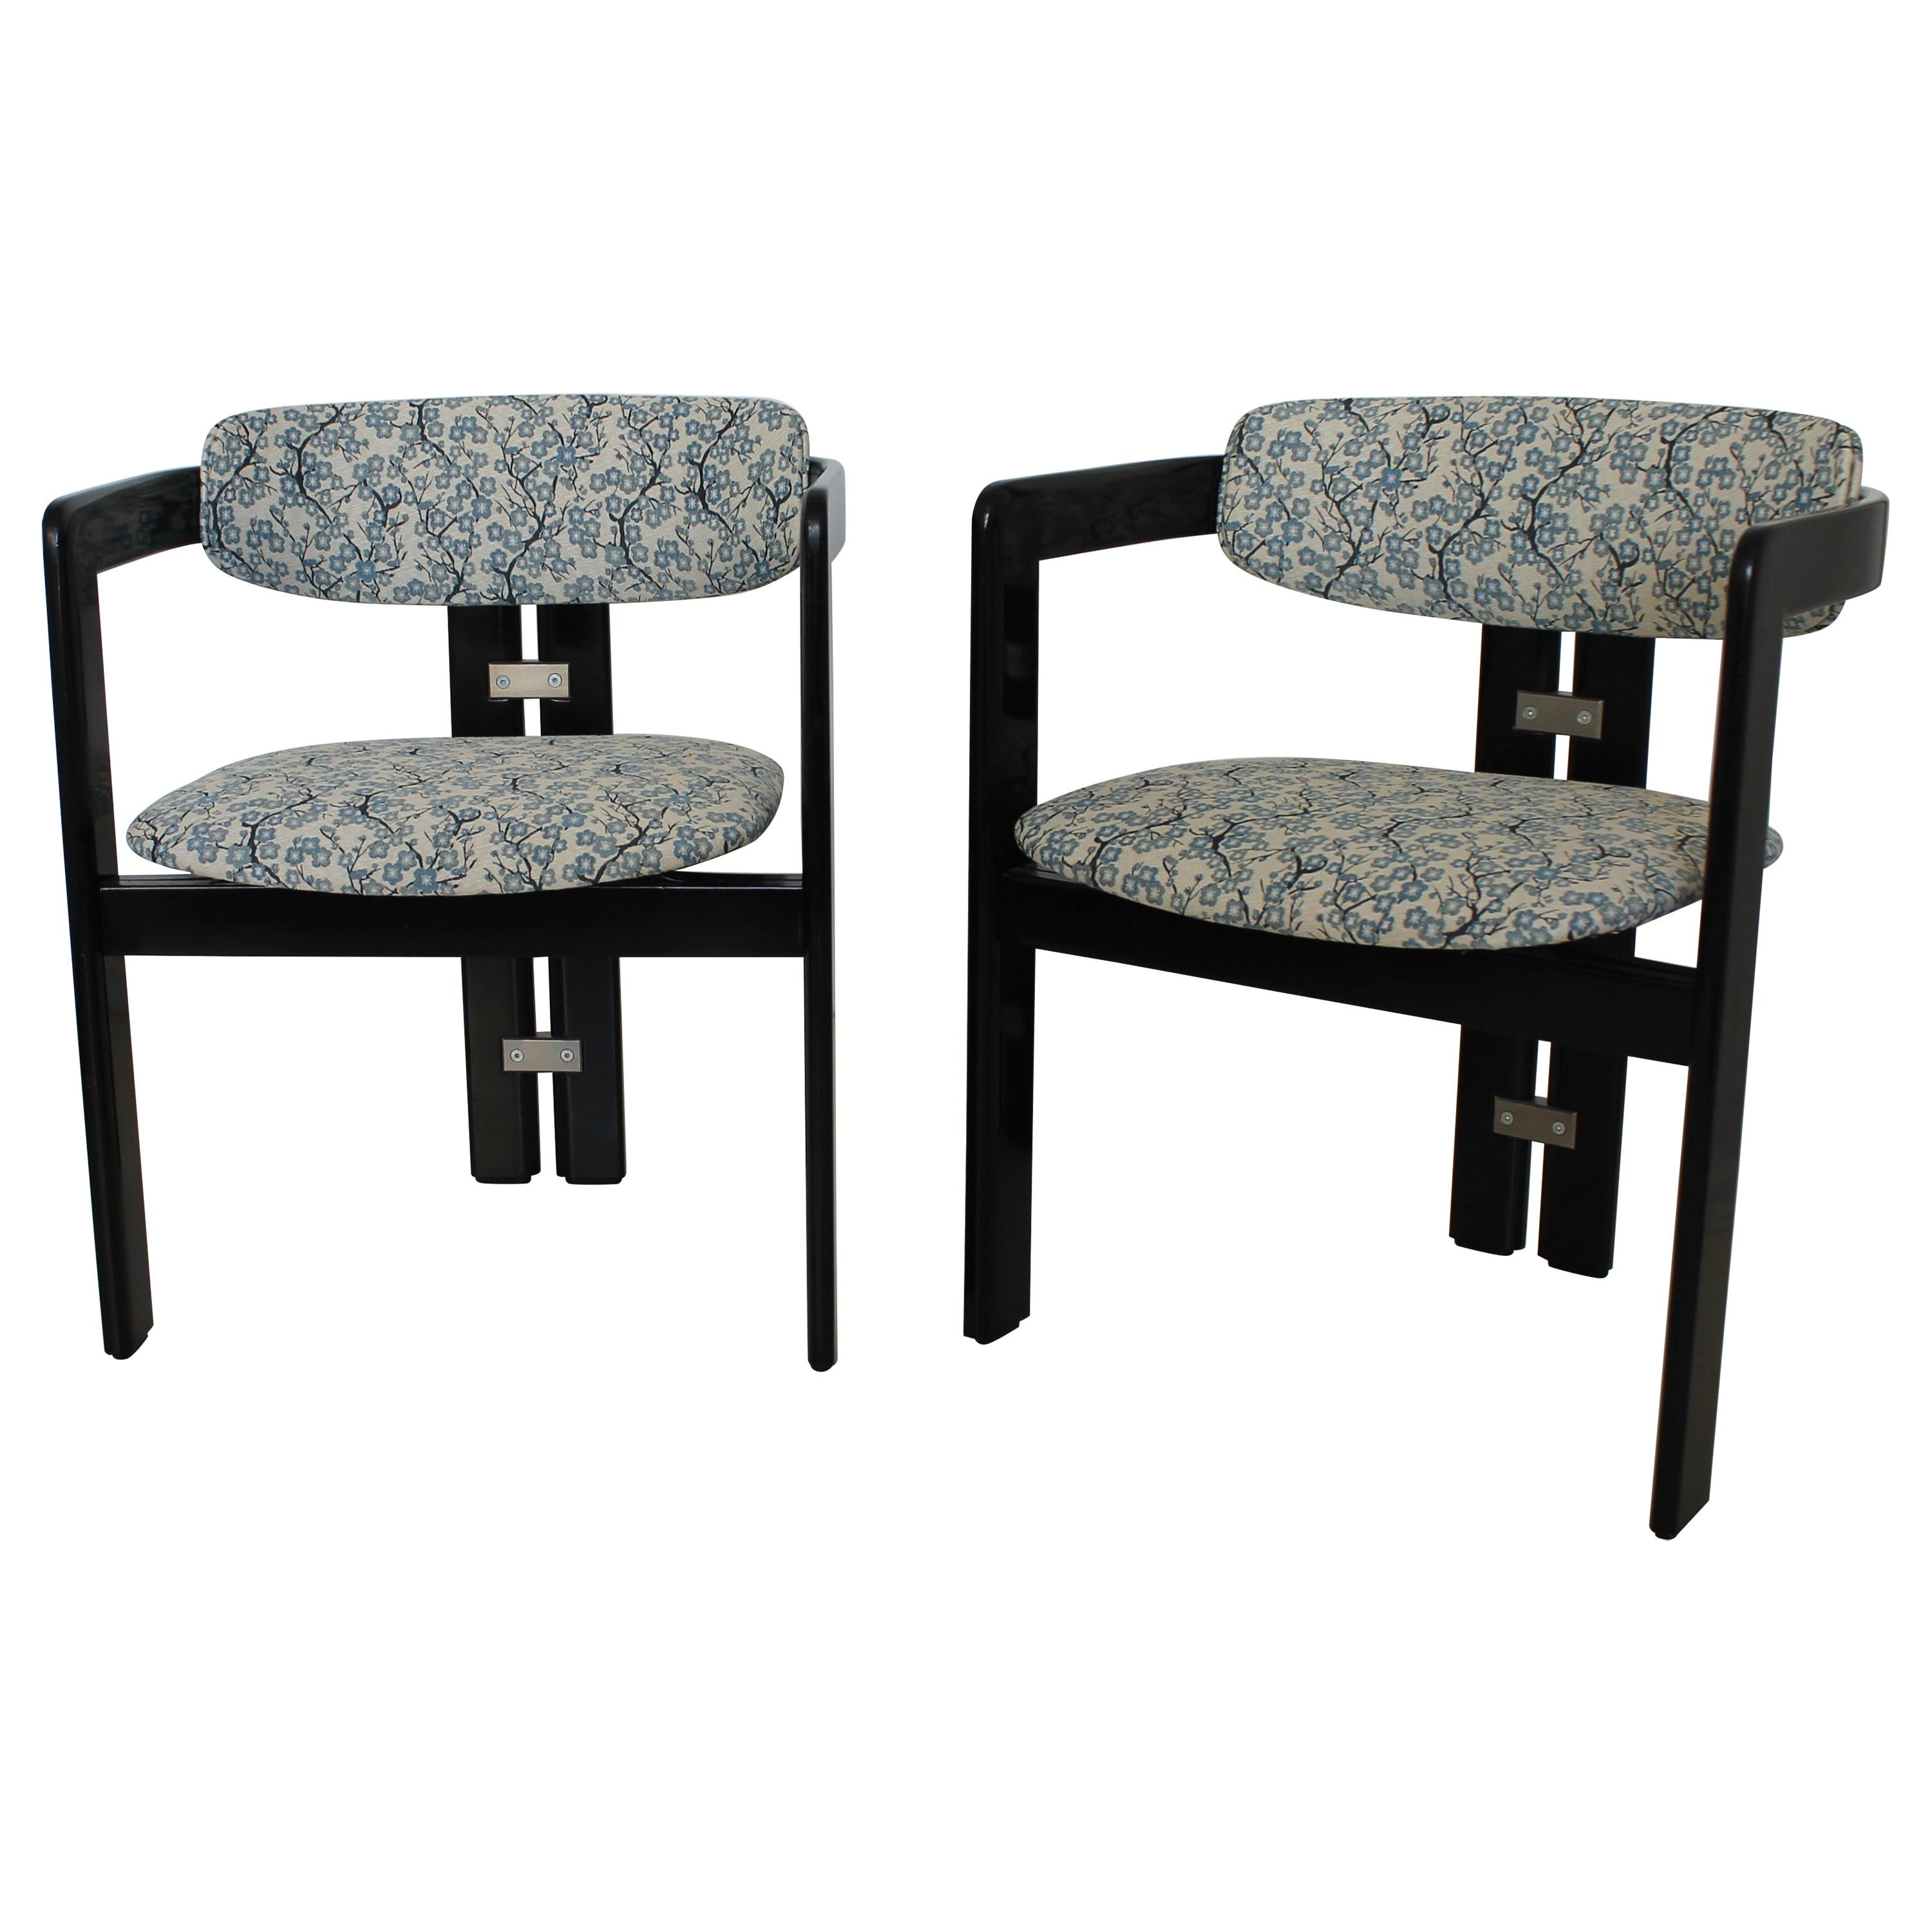 Pair of Black "Pamplona" Chairs by Augusto Savini for Pozzi, Italy, 1965